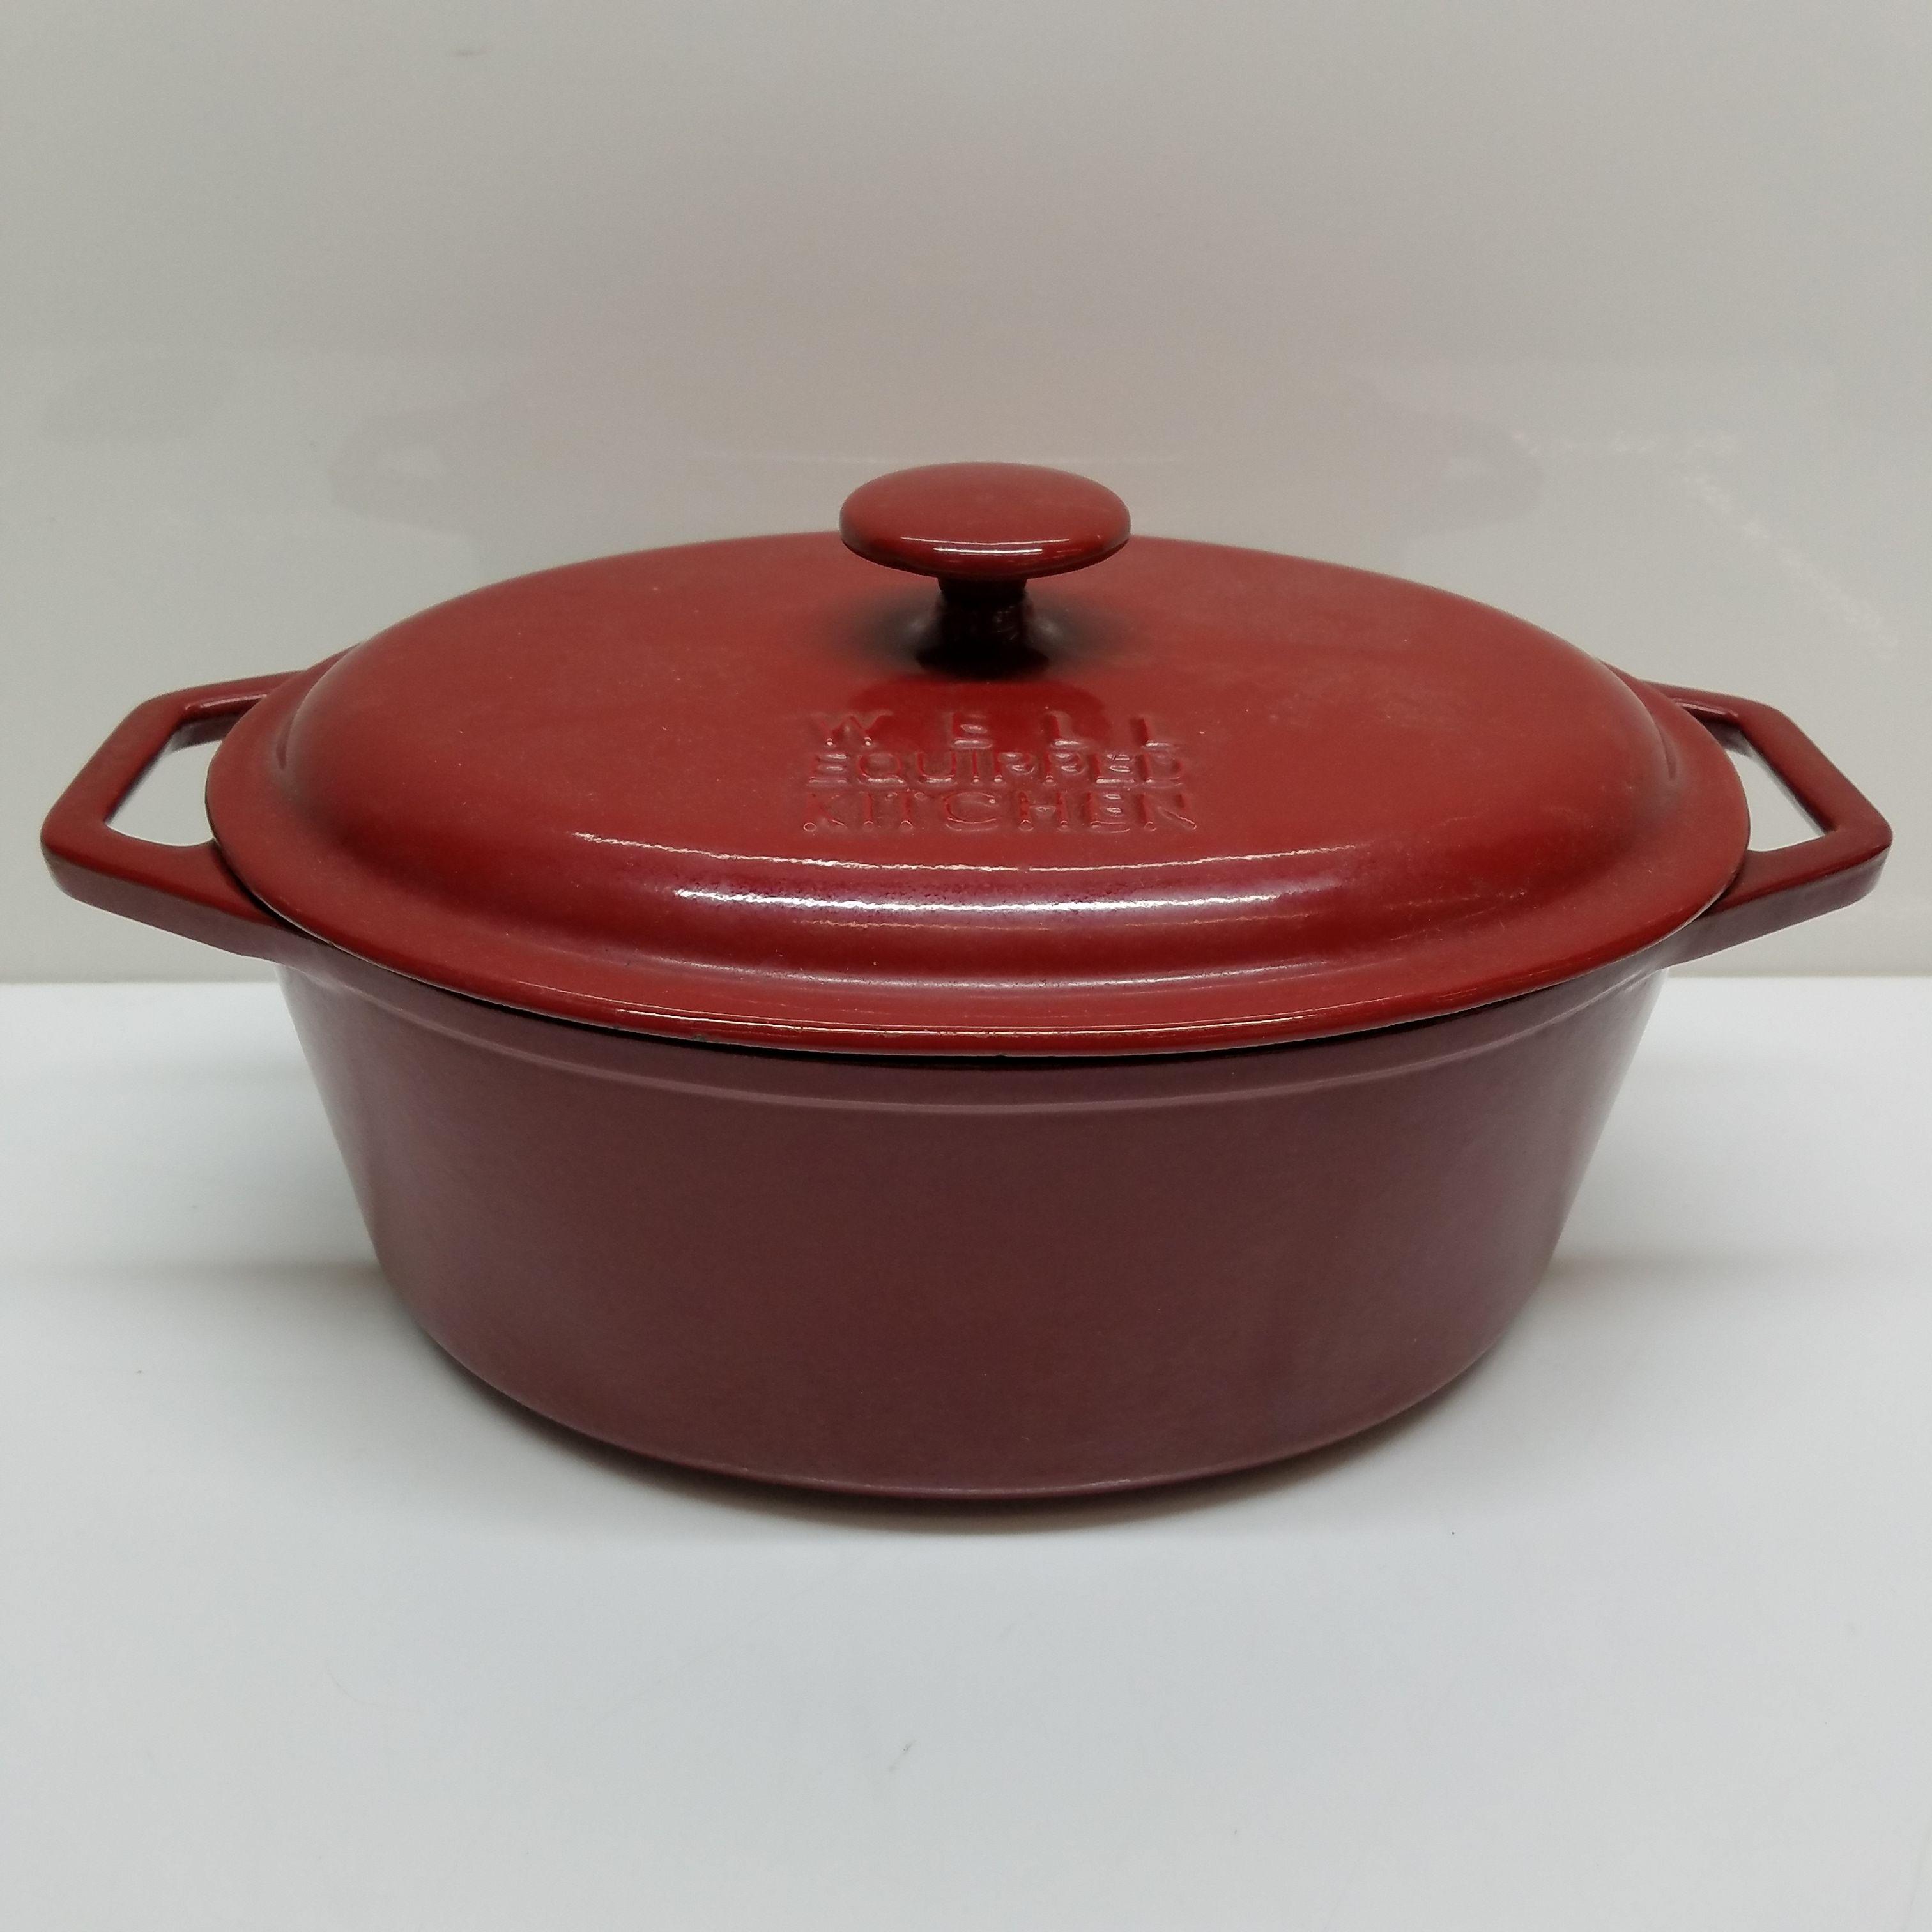  Klee 4-Quart Dutch Oven Pot with Self-Basting Lid (Pumpkin) -  Heavy-Duty Enameled Cast Iron Dutch Oven Casserole Dish for Braising,  Broiling, Baking, Frying, and More - Oven-Safe Up To 500°F: Home